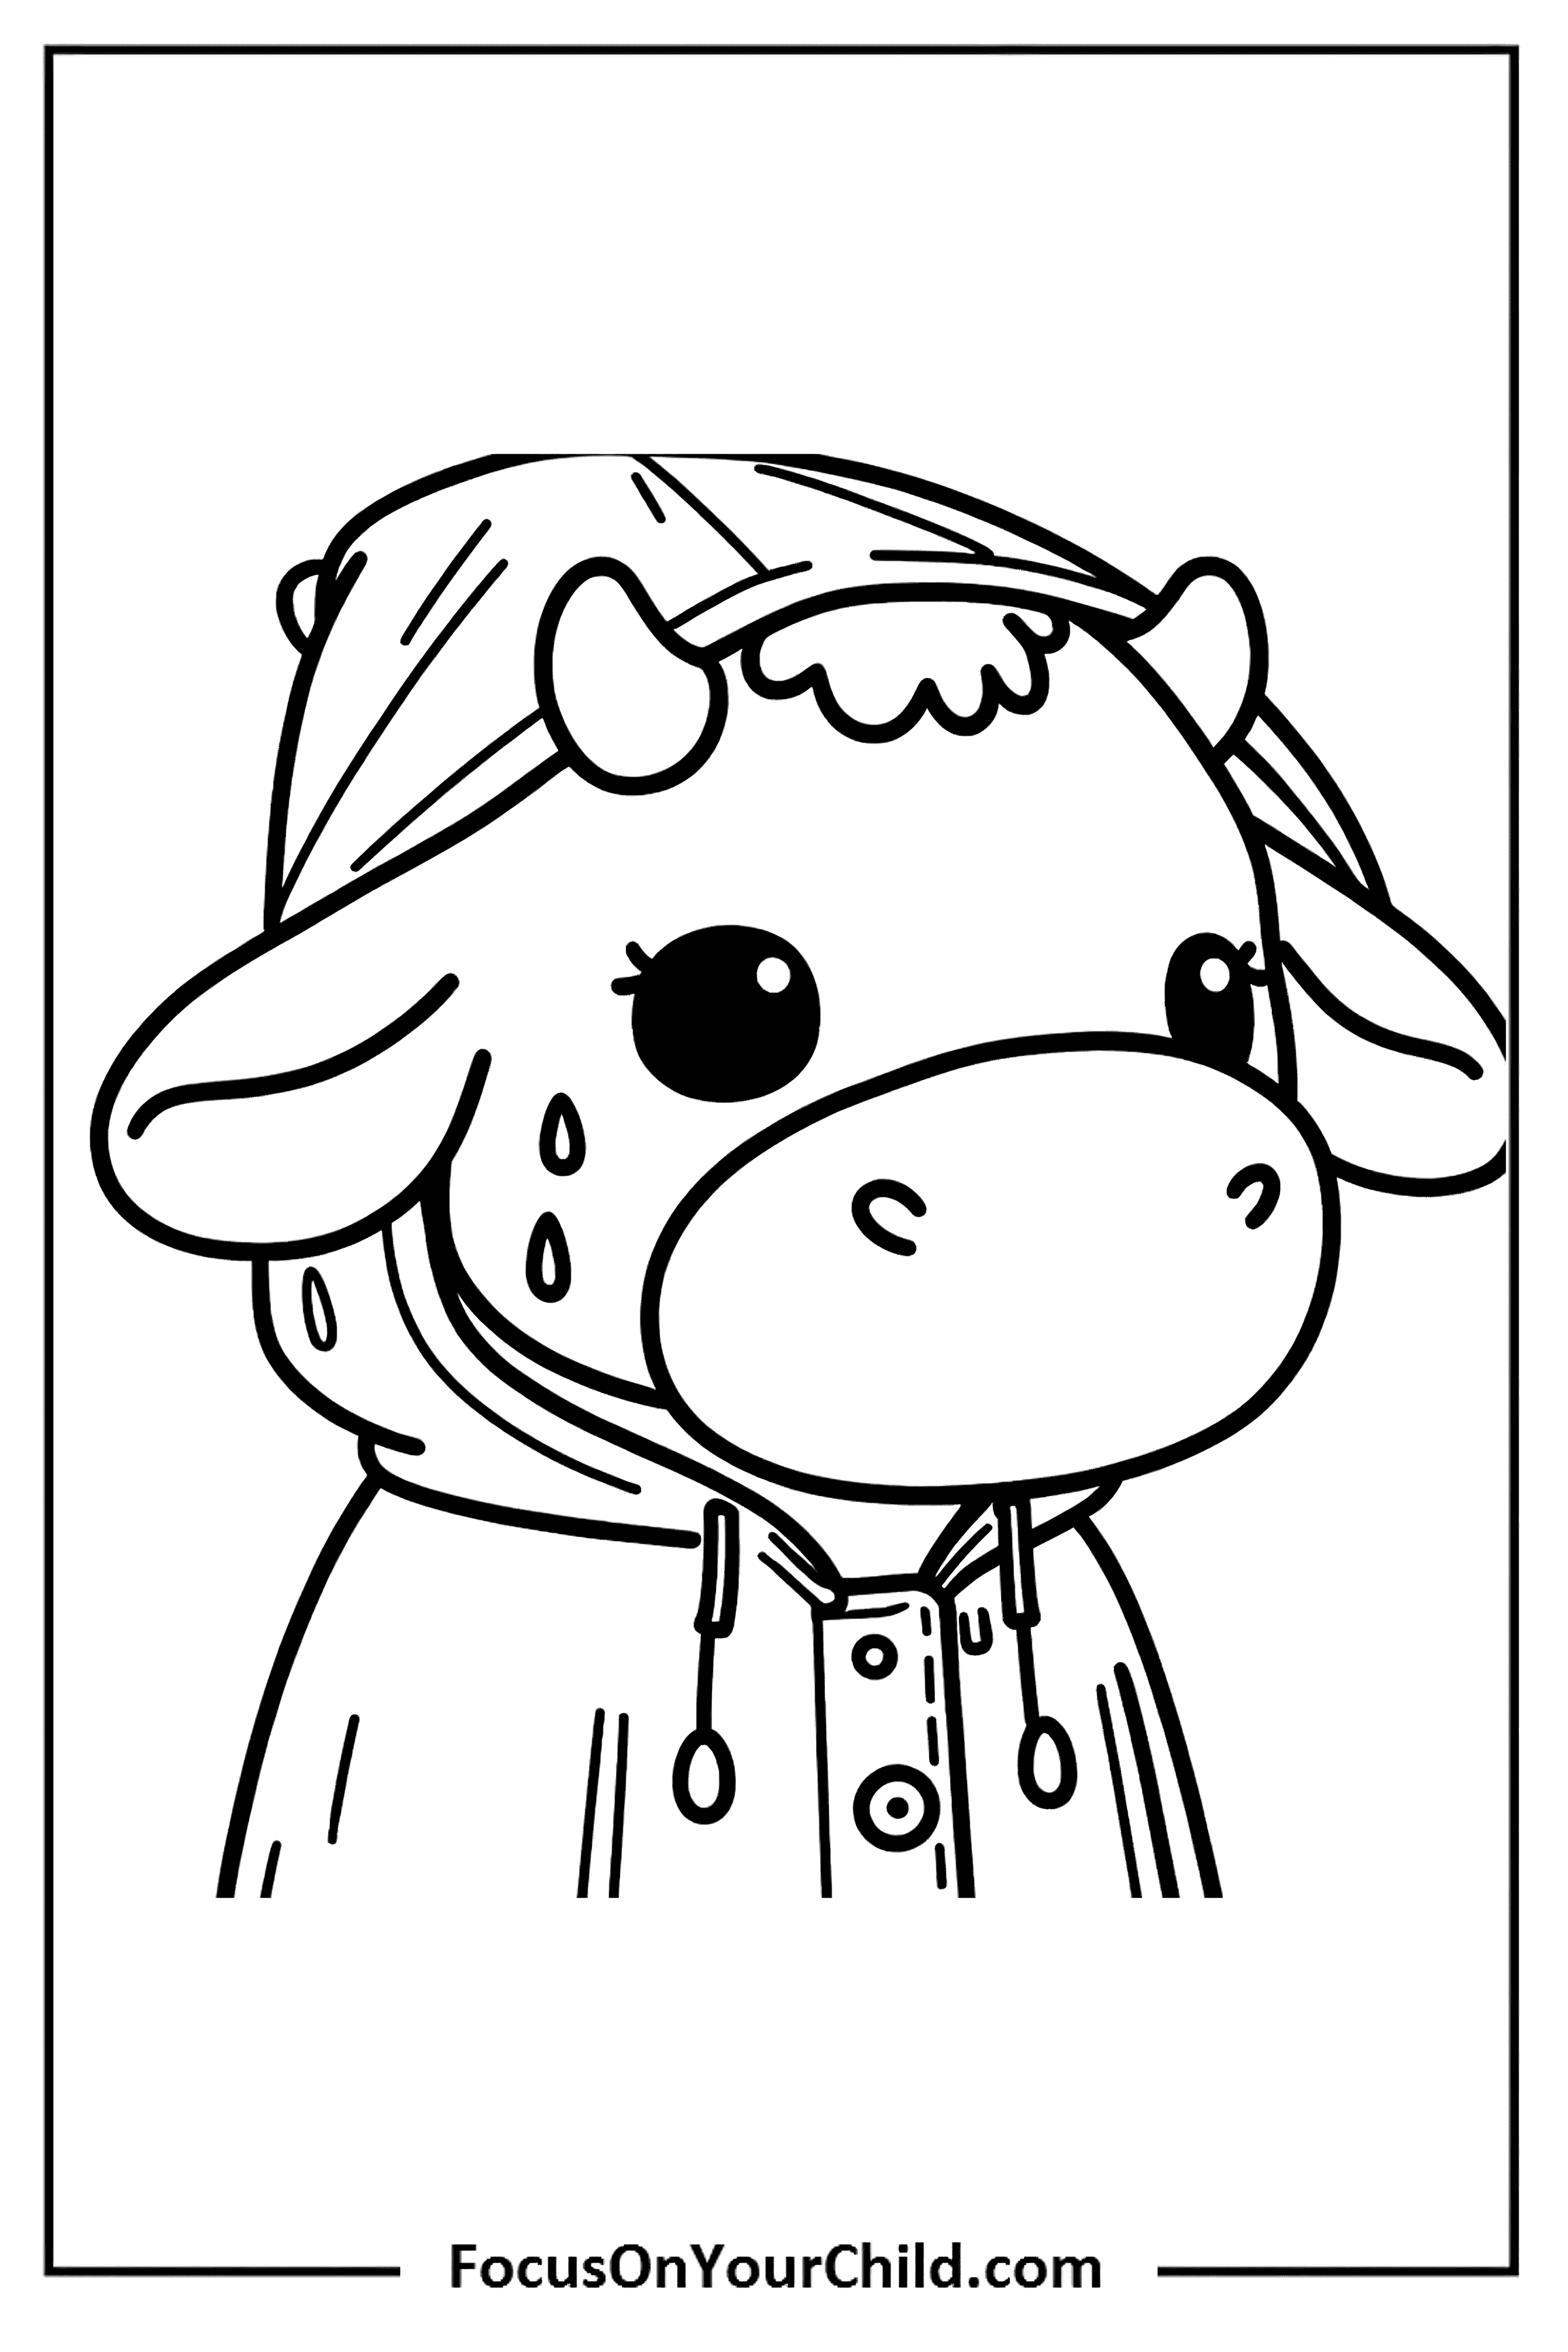 Adorable cow in a hoodie, perfect for coloring books and child development resources.